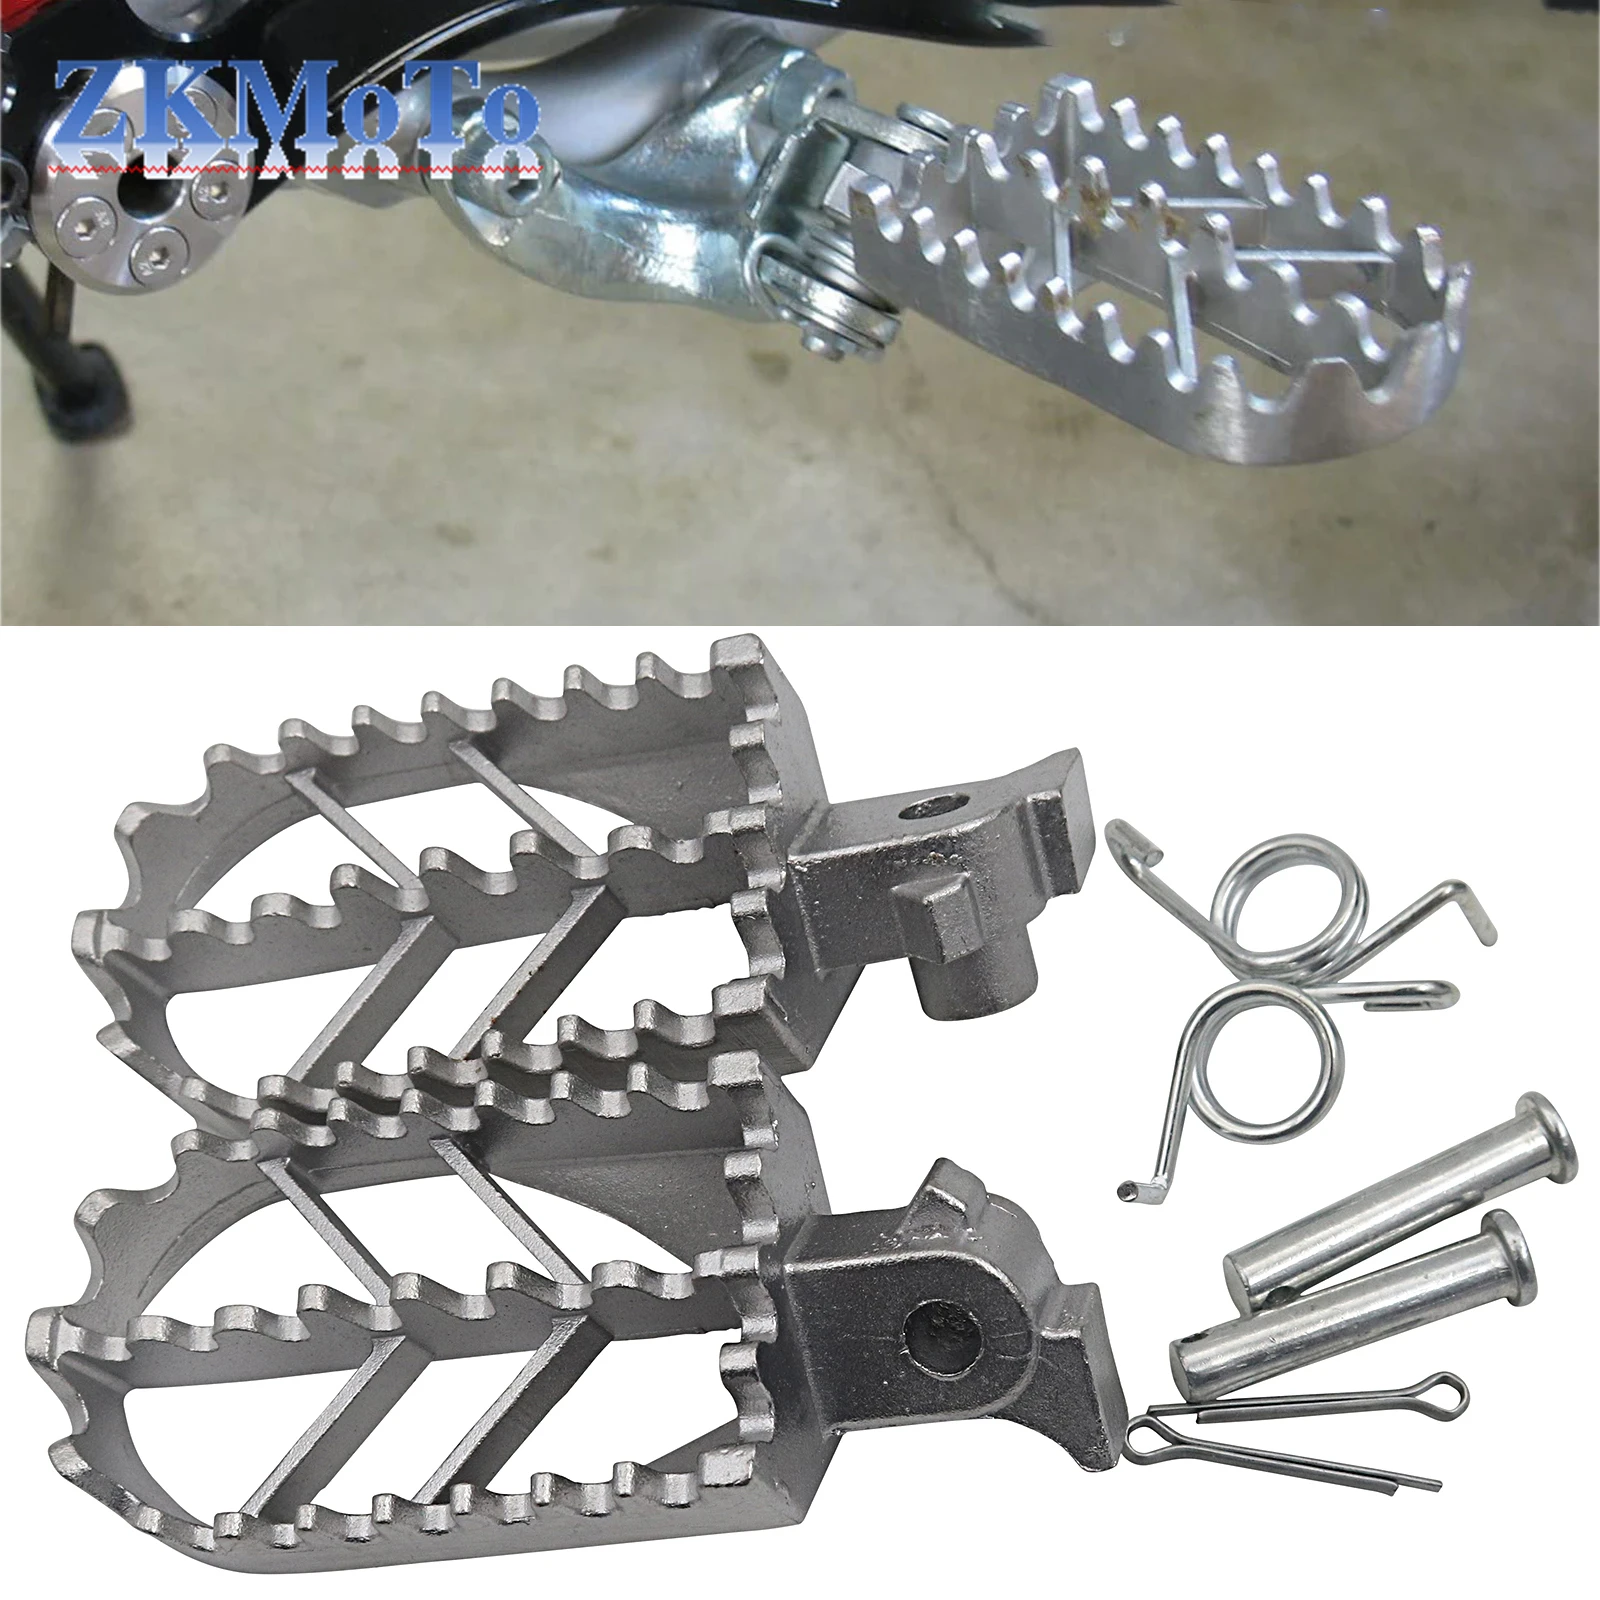 

Stainless Steel Footpegs Foot Rest Pegs For TW200 PW50 PW80 Pit Dirt Motor Bike Motorcycle